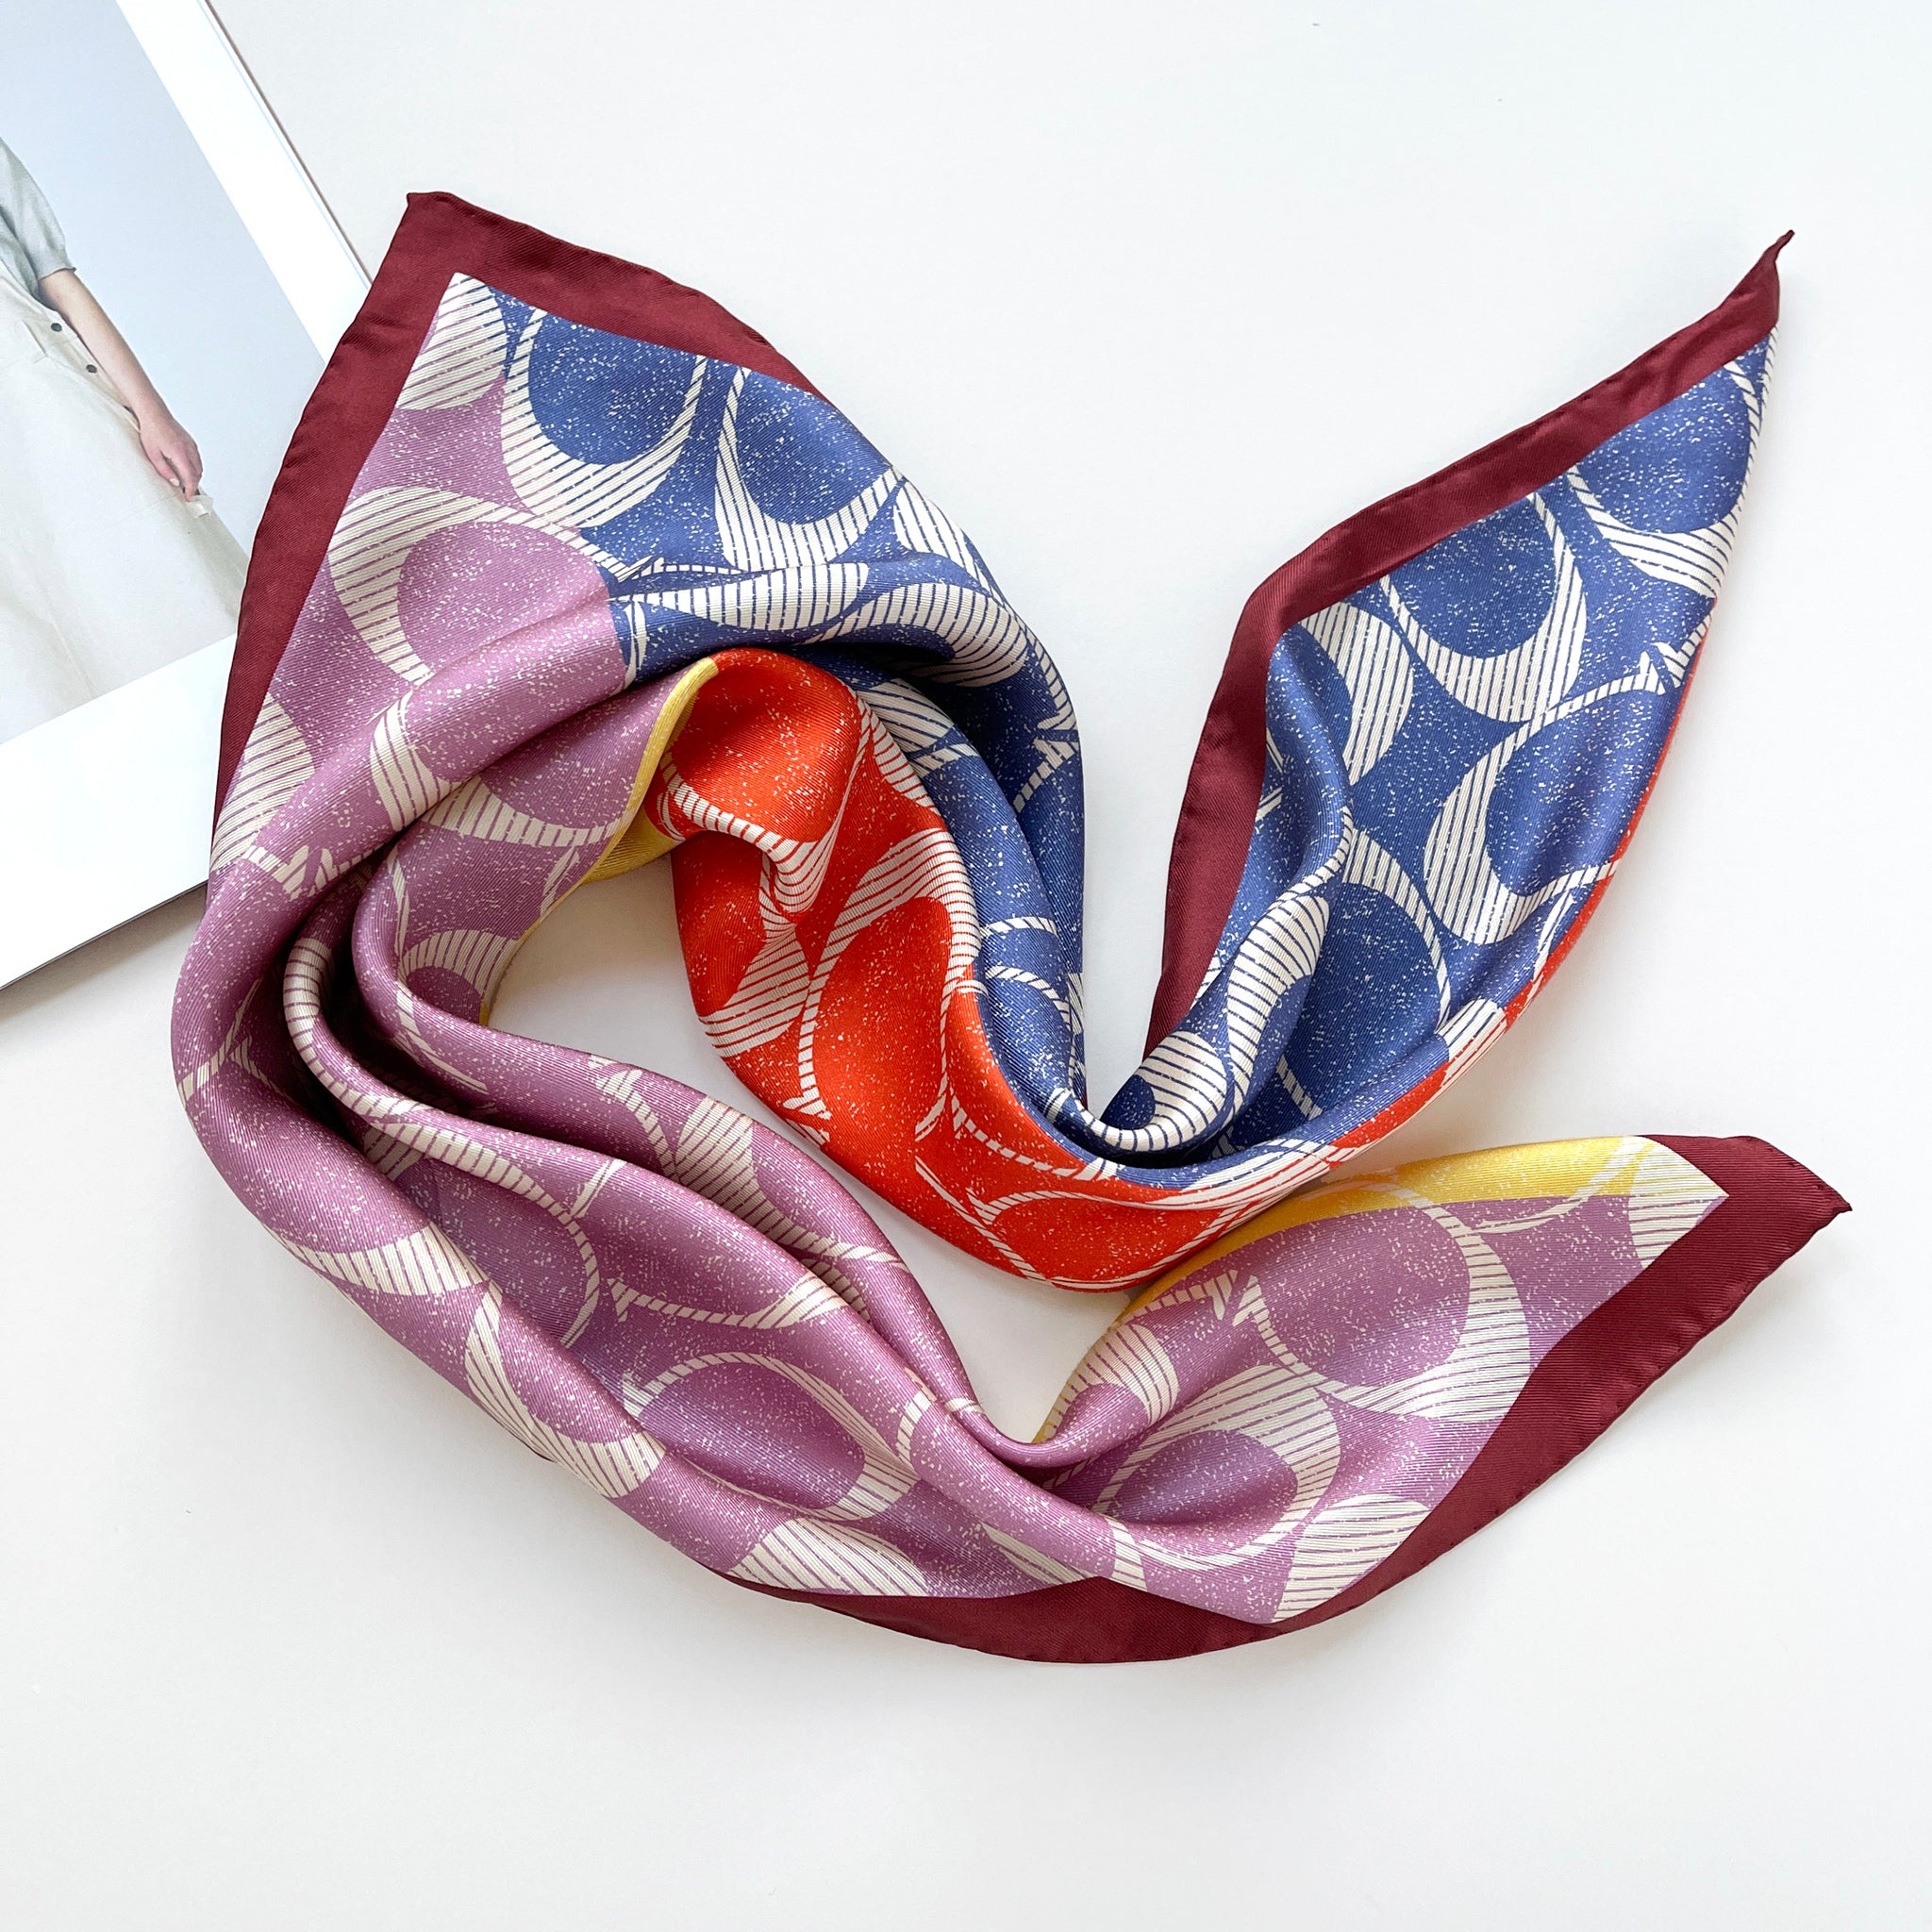 a luxury square silk scarf in lilac oink, blue, orange and yellow featuring burgundy hand-rolled edges and classic print